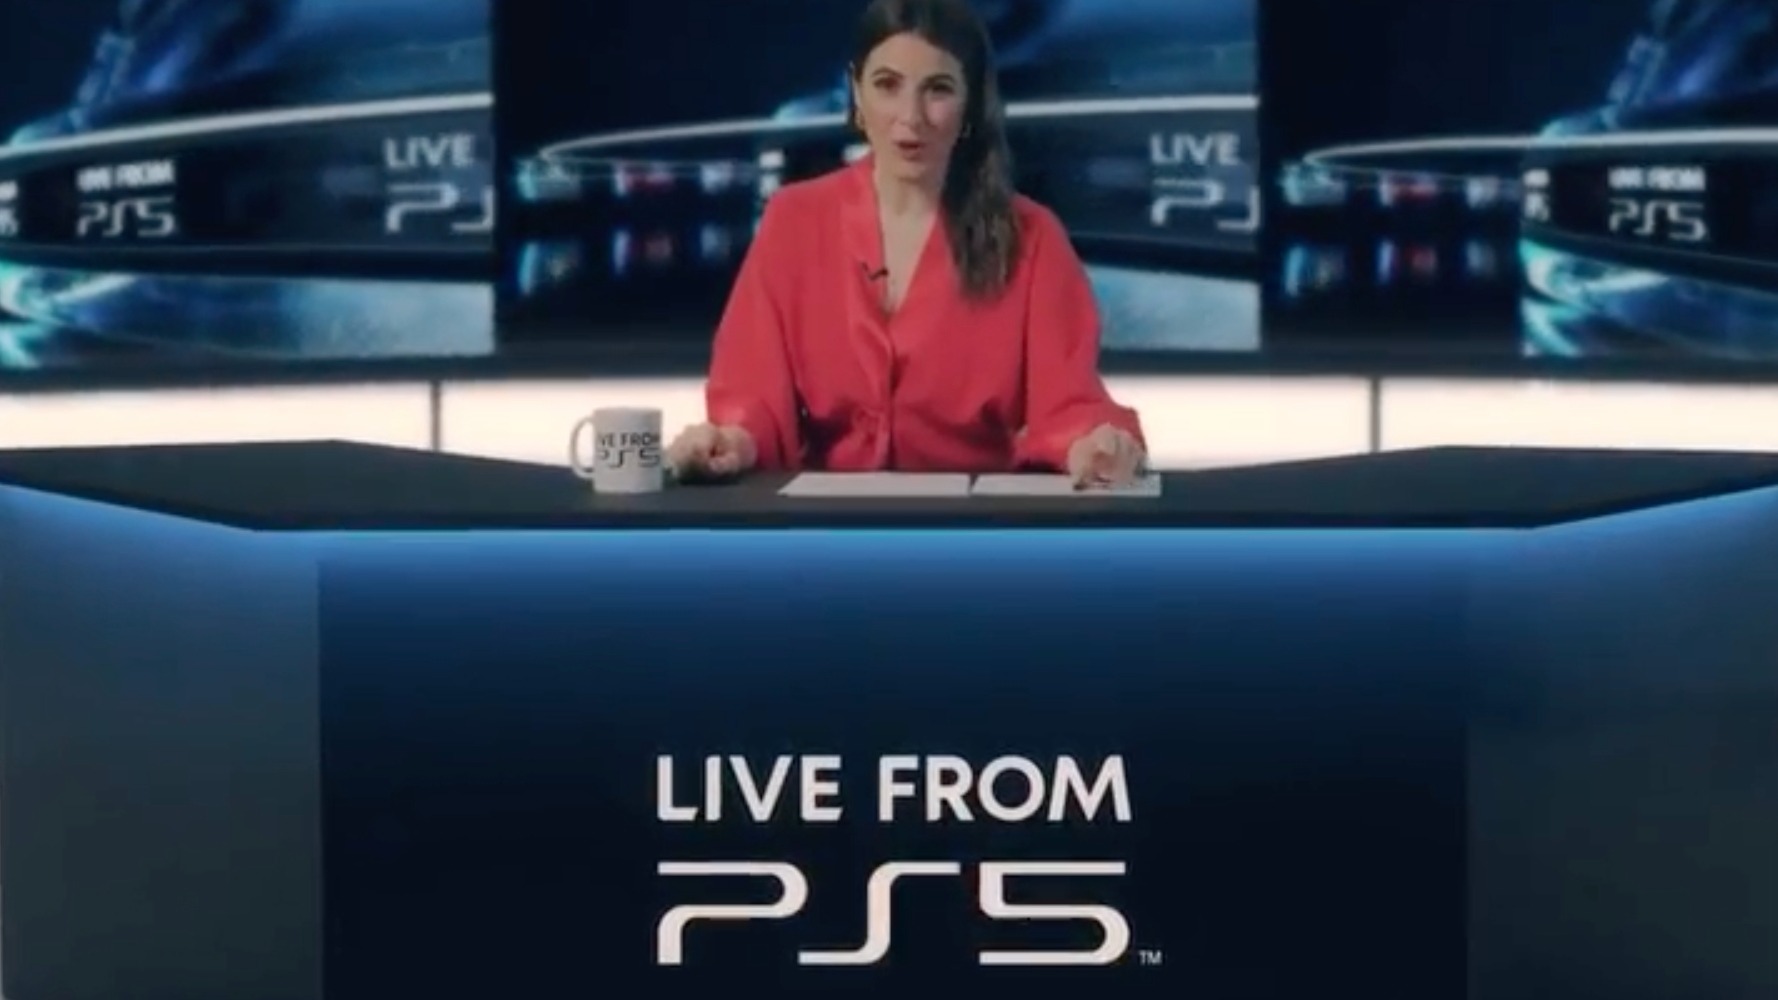 Live from PS5